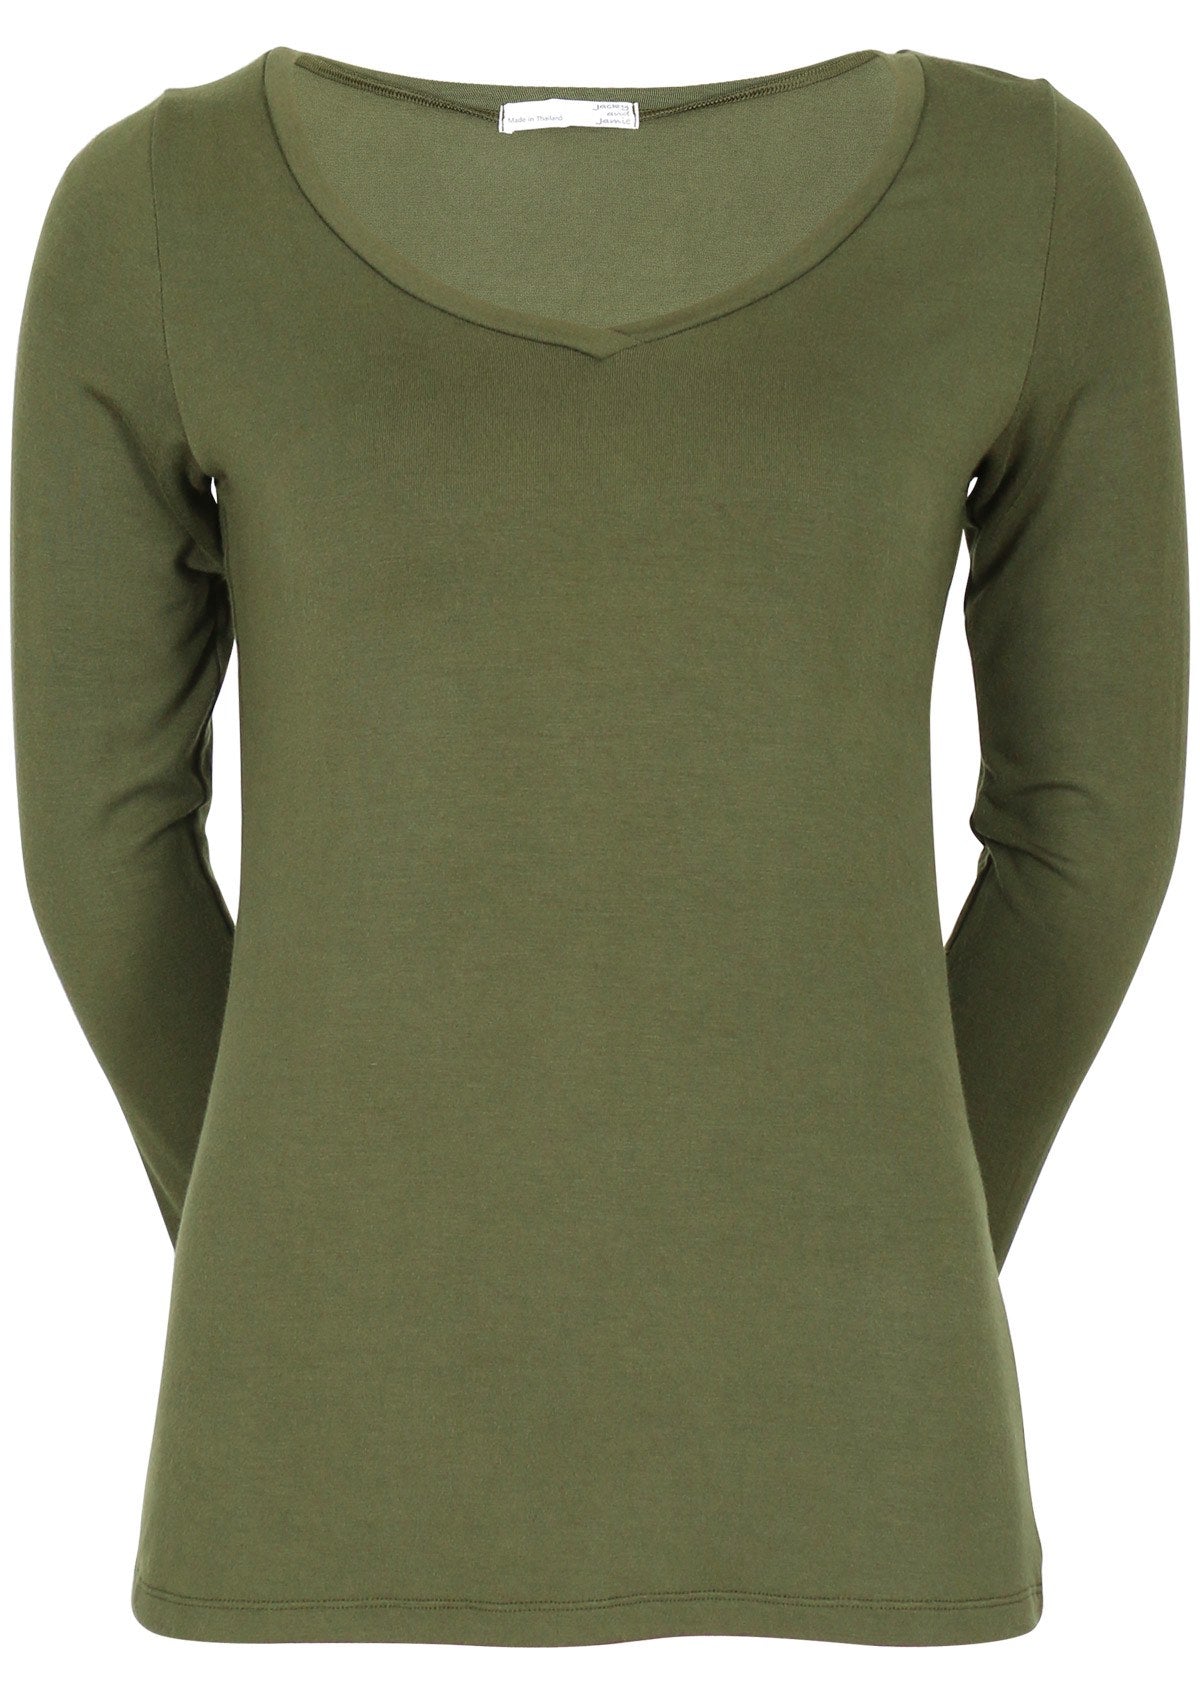 Front view of women's olive green long sleeve stretch v-neck soft rayon top.